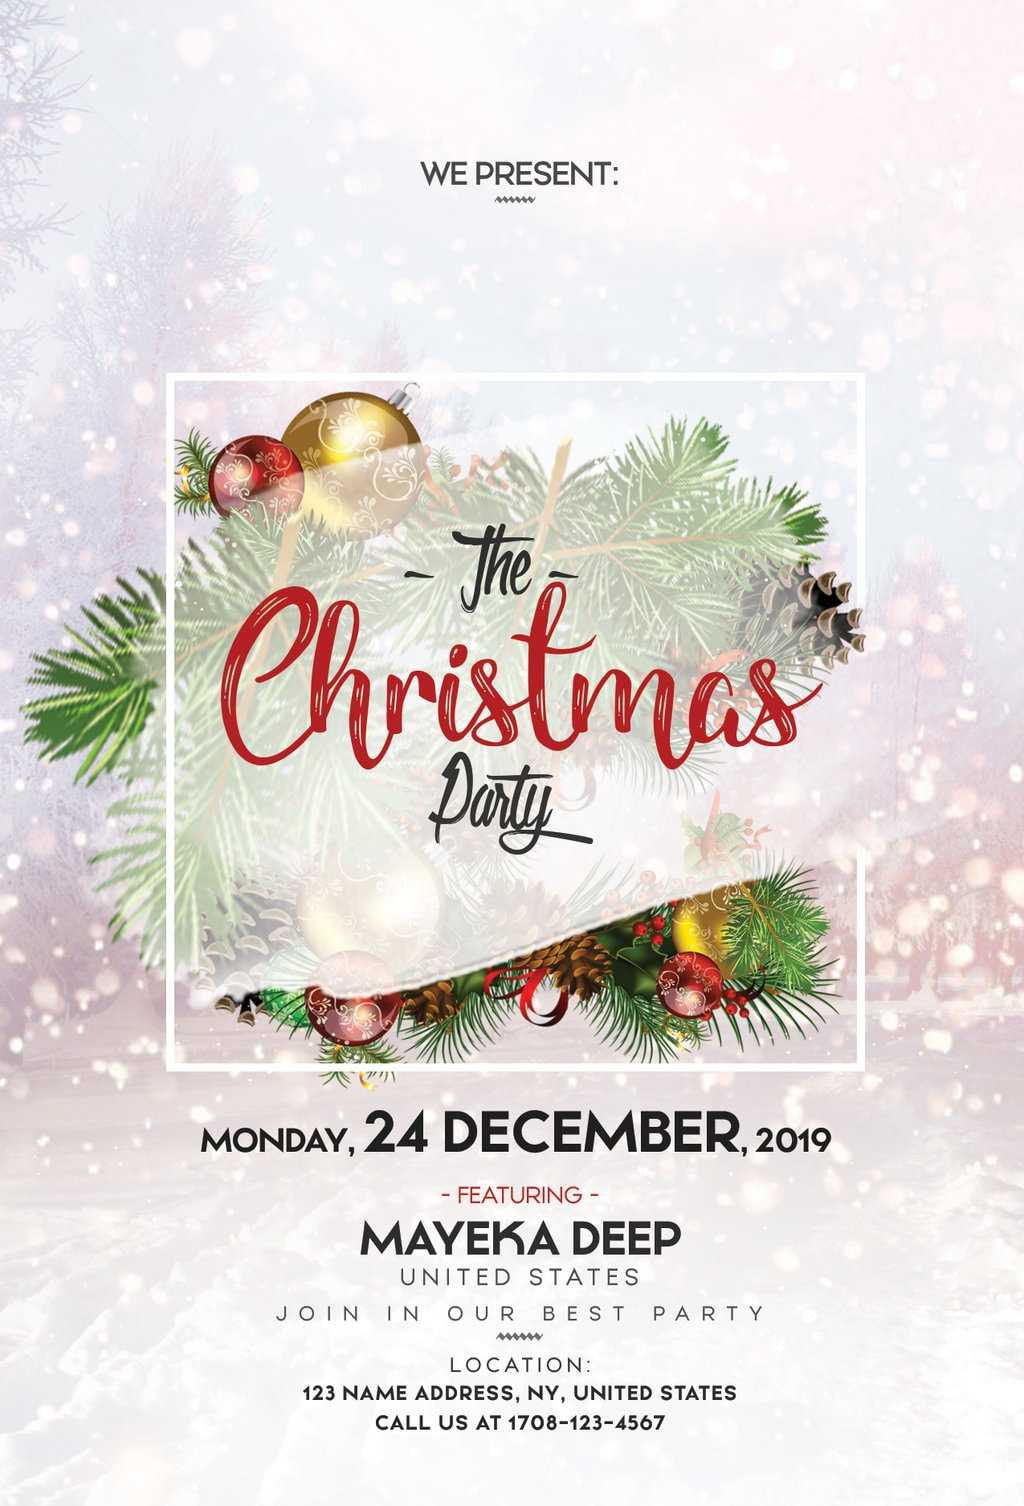 Merry Christmas Free Psd Flyer Template | Freebiedesign Pertaining To Christmas Brochure Templates Free